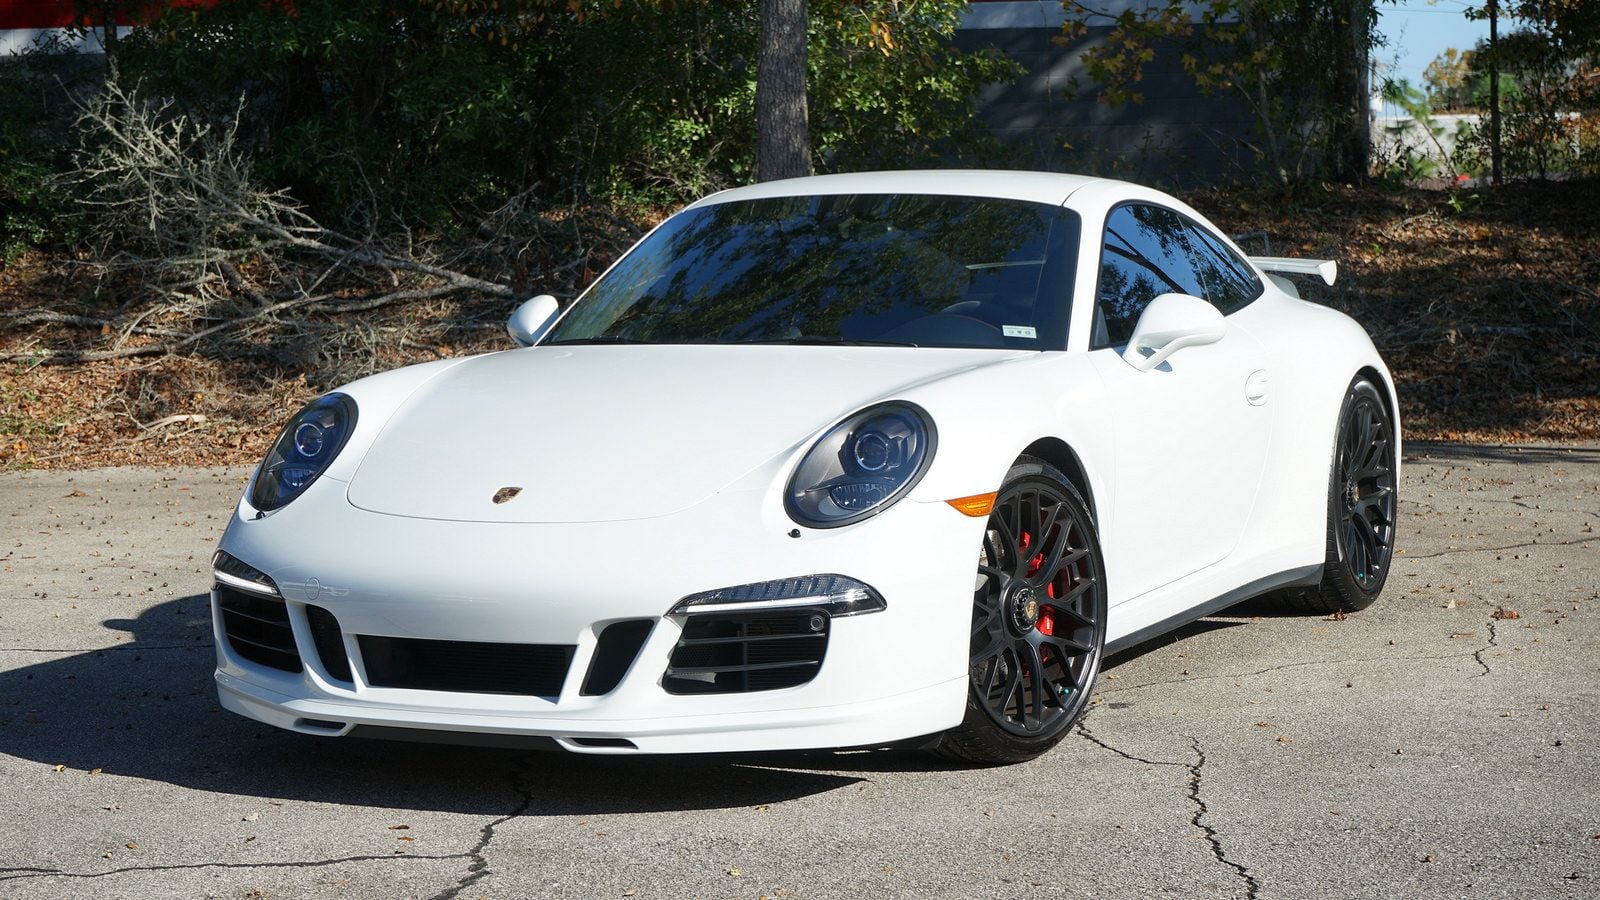 2016 Porsche 911 - 911 GTS Coupe, manual, excellent condition CPO at Capital Porsche FL, awesome options - Used - VIN WP0AB2A93GS122454 - 7,024 Miles - 6 cyl - 2WD - Manual - Coupe - White - Tallahassee, FL 32304, United States